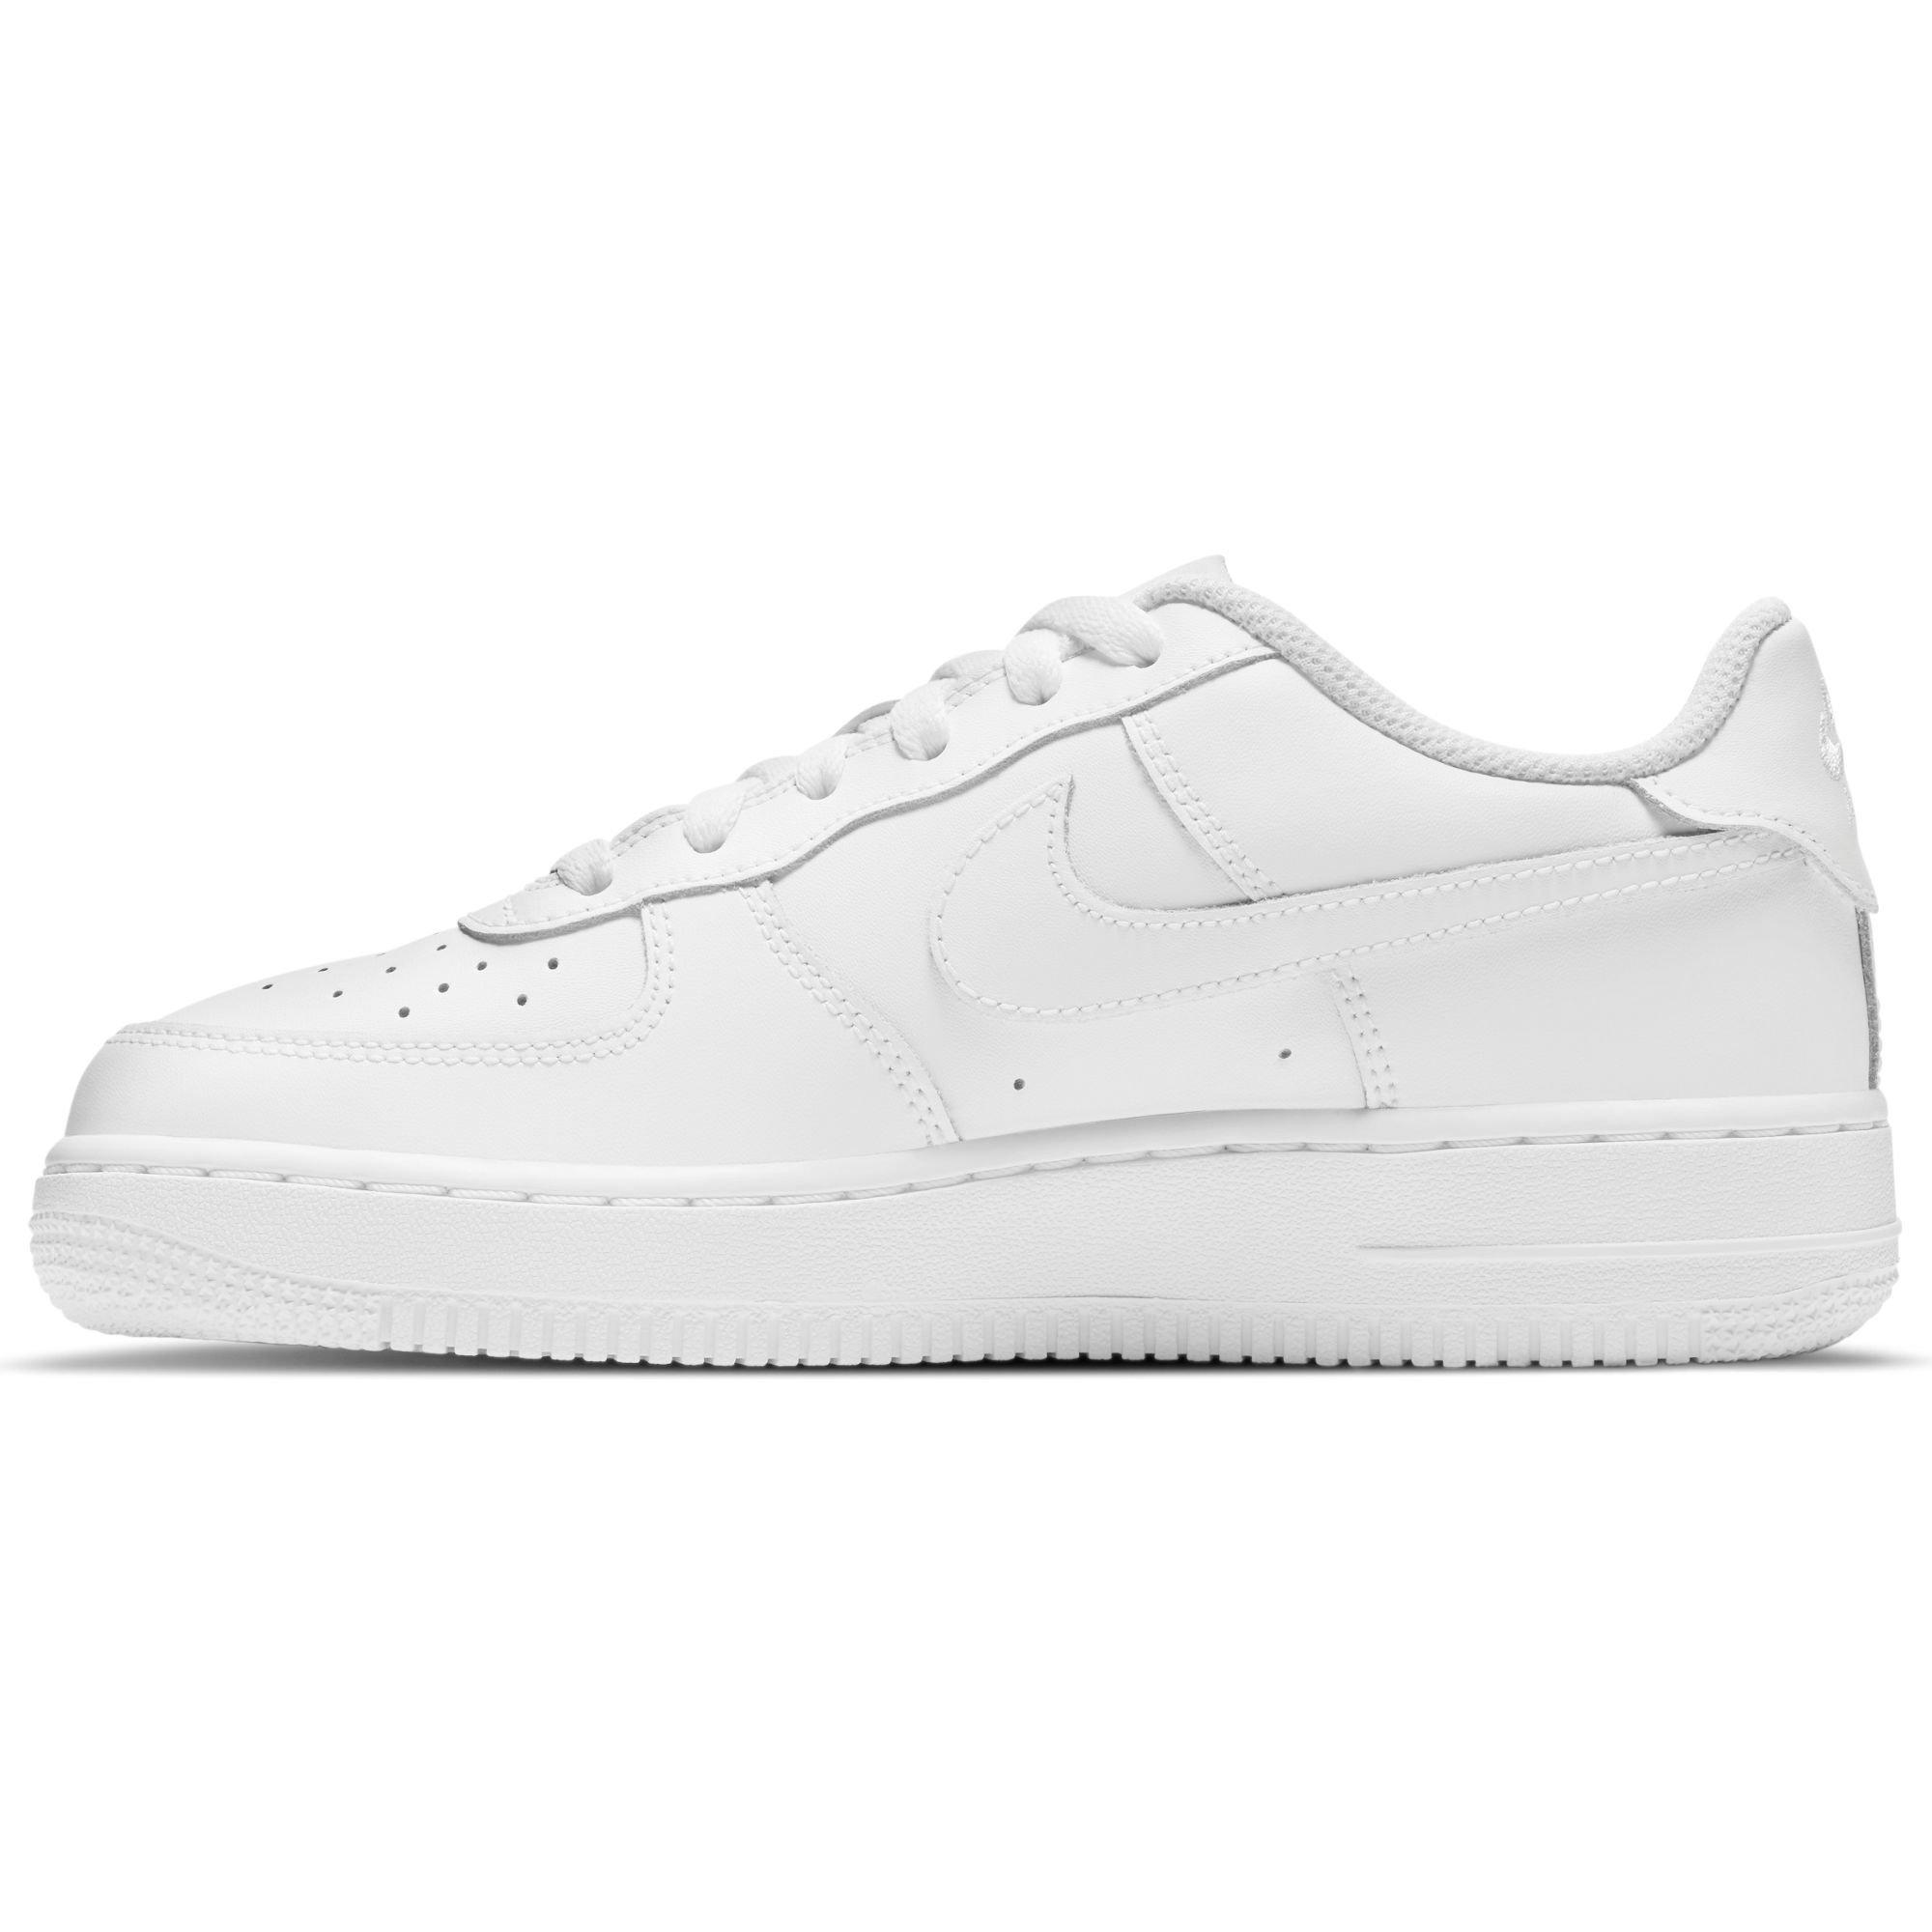 Air Force 1 LV8 Utility Grade School Lifestyle Shoes (White)